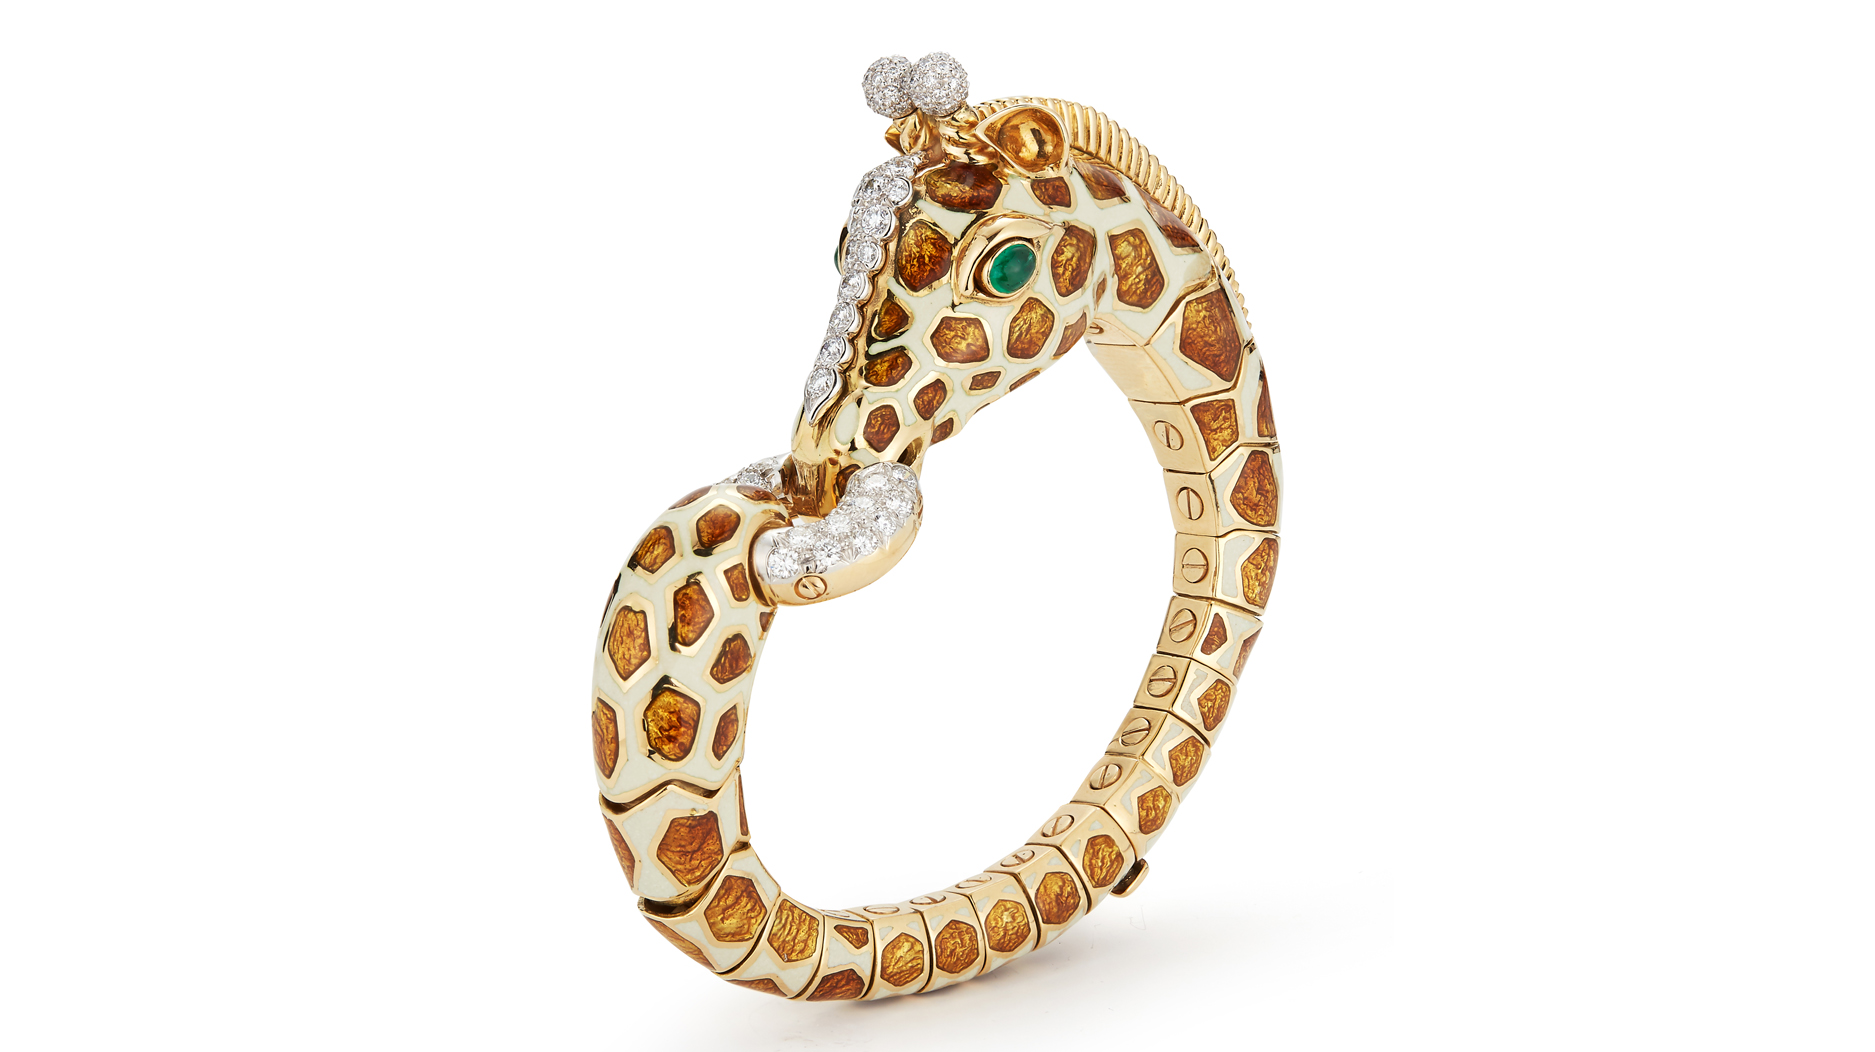 David Webb to Hold an Exhibition of Its Animal Jewelry | National Jeweler